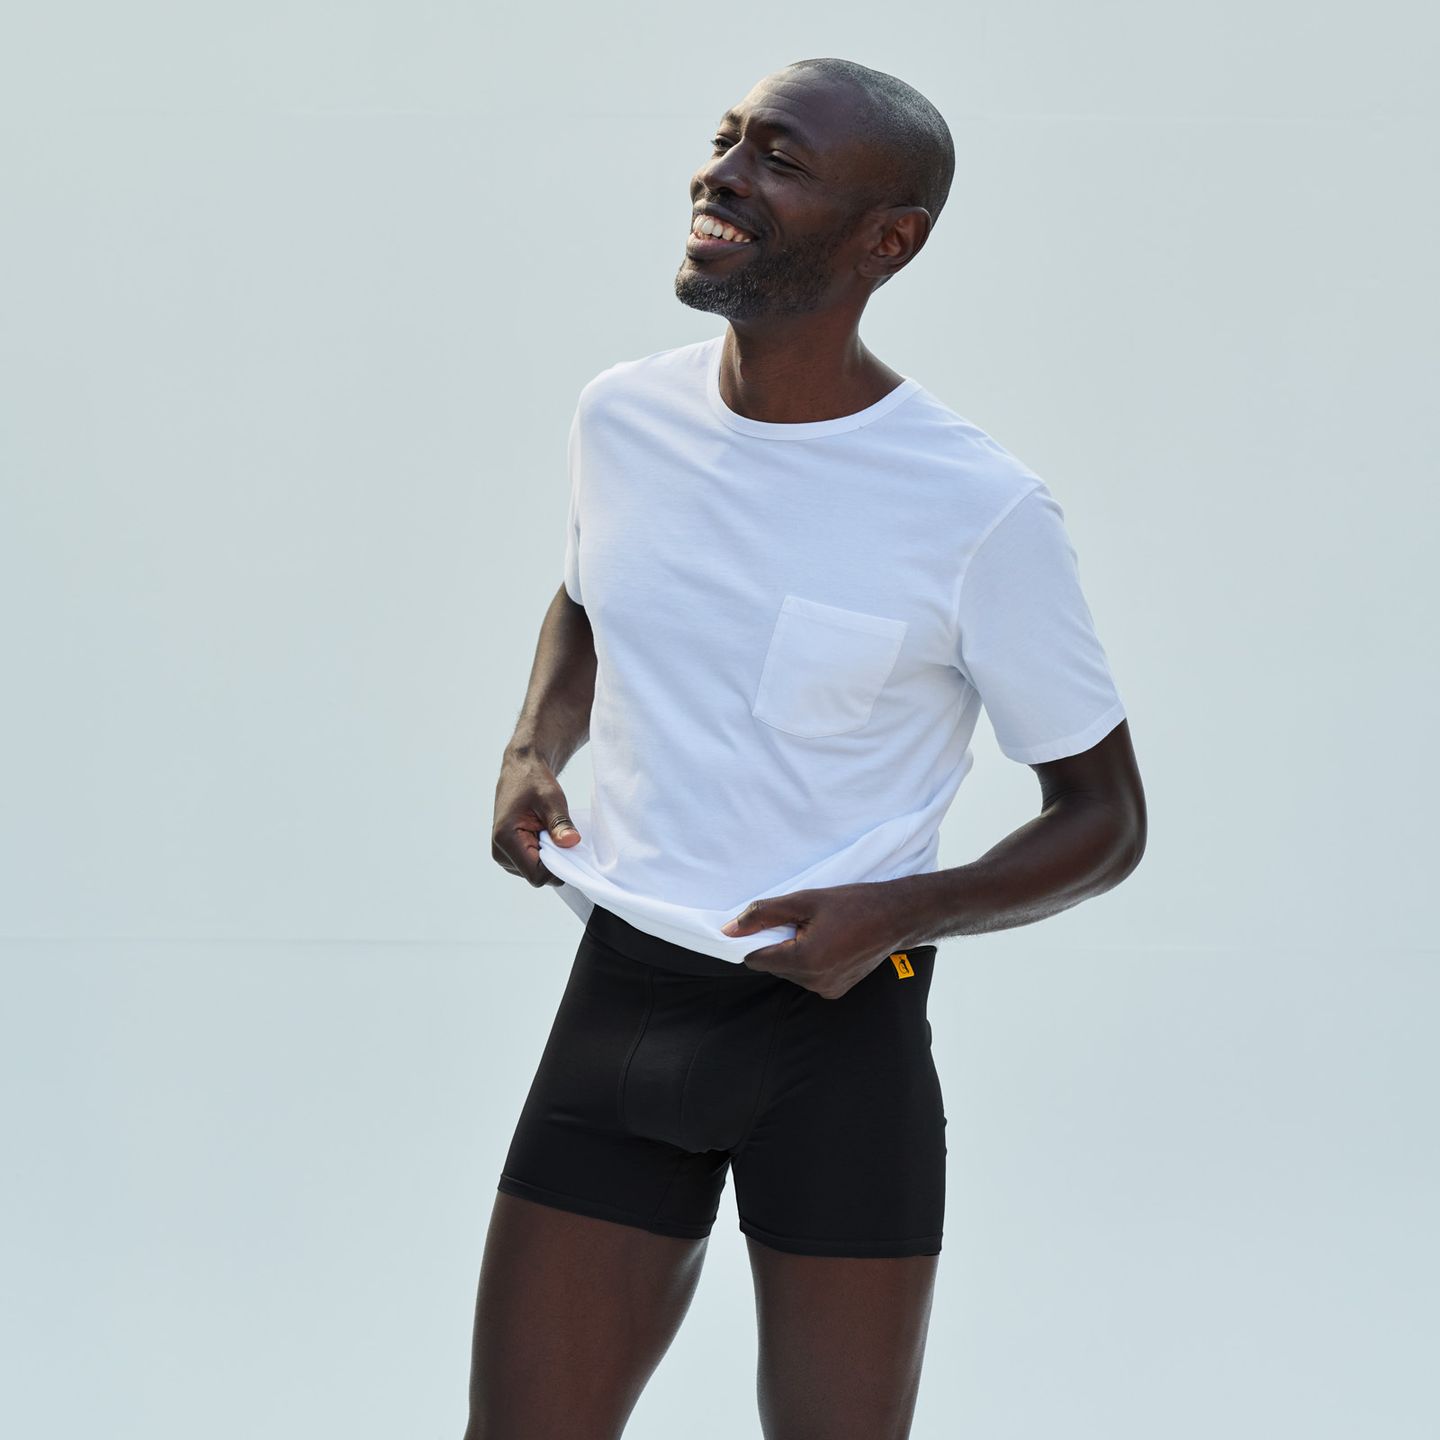 A person standing up wearing a white t shirt and black boxers